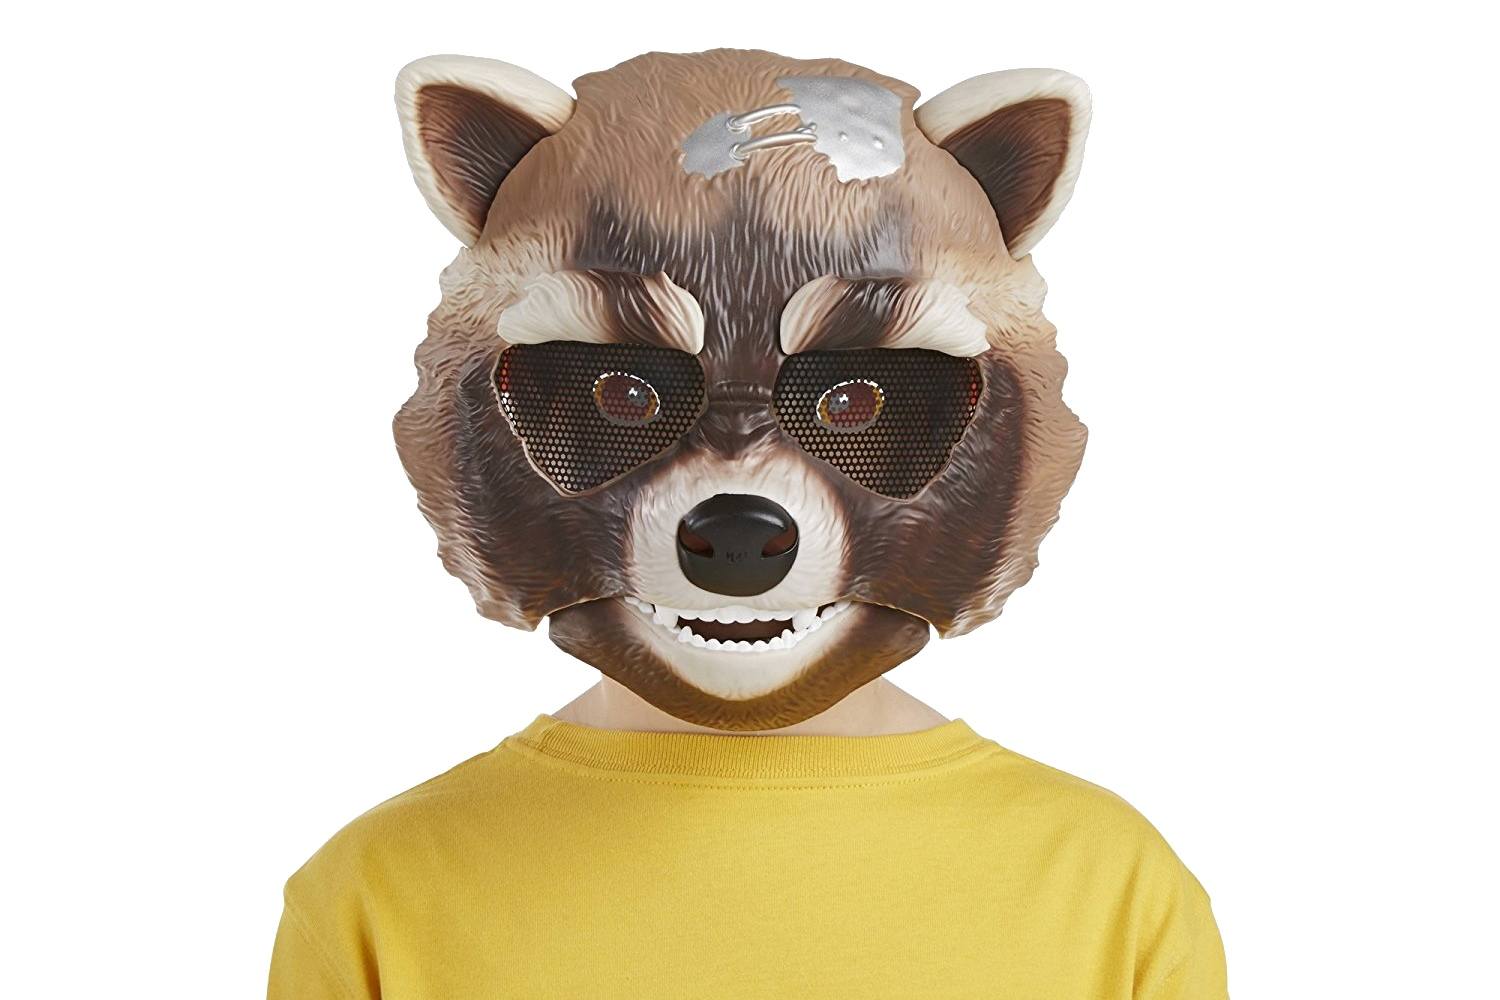 Marvel Guardians of the Galaxy Rocket Raccoon Action Mask - image 3 of 5